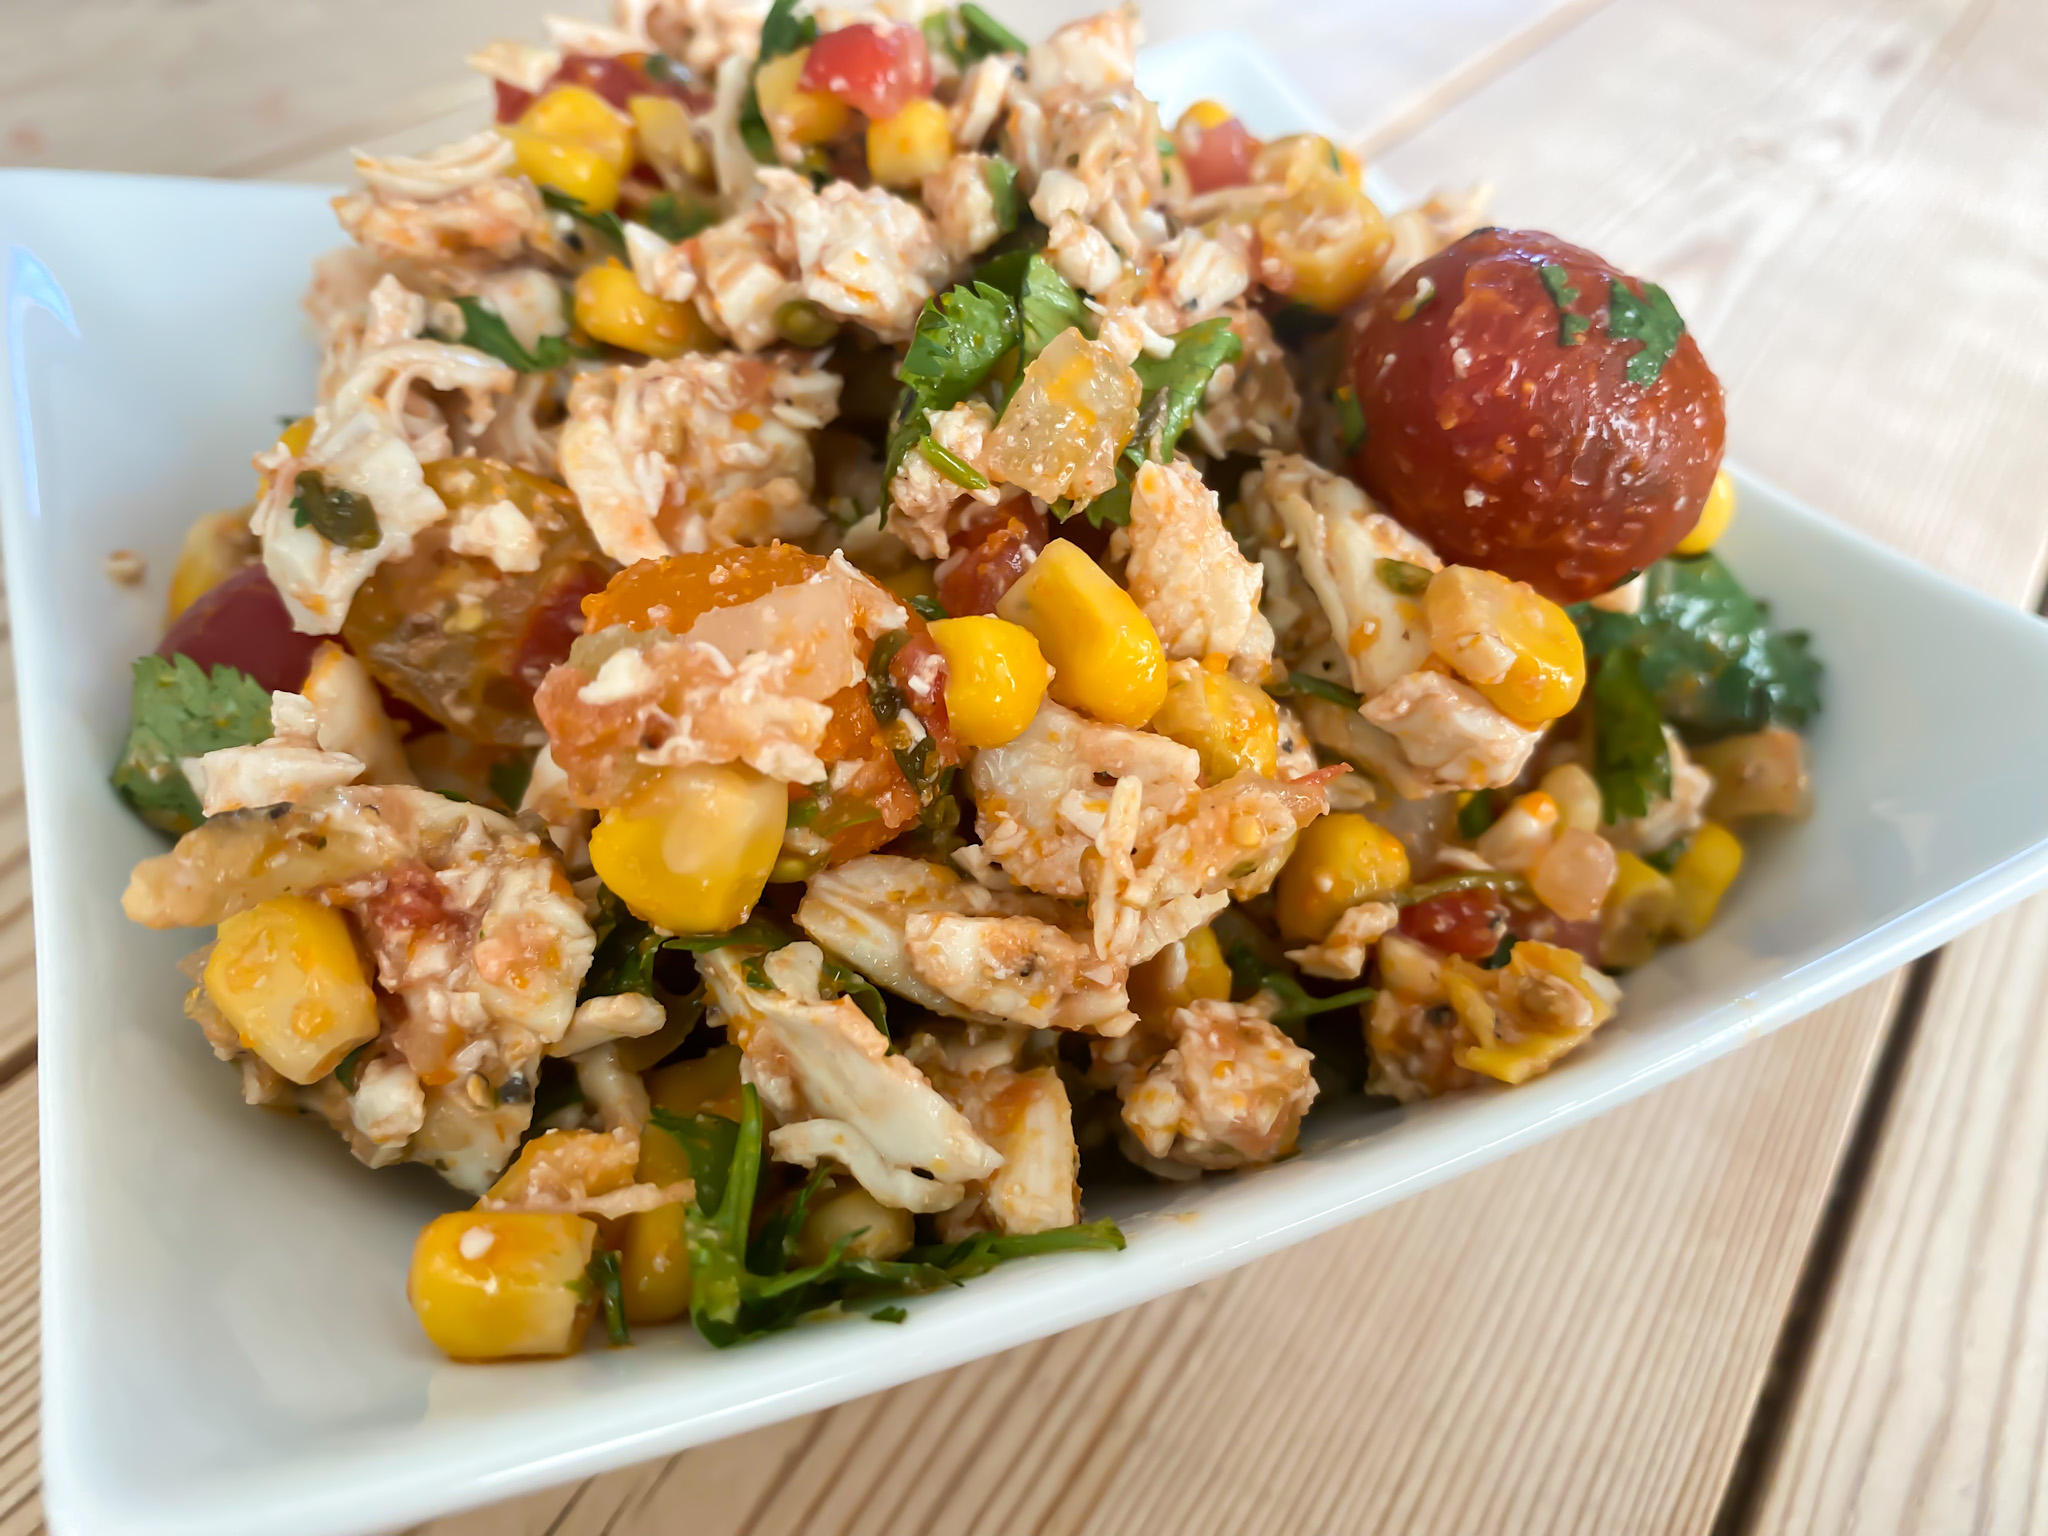 Chopped Chicken and Roasted Corn Salad